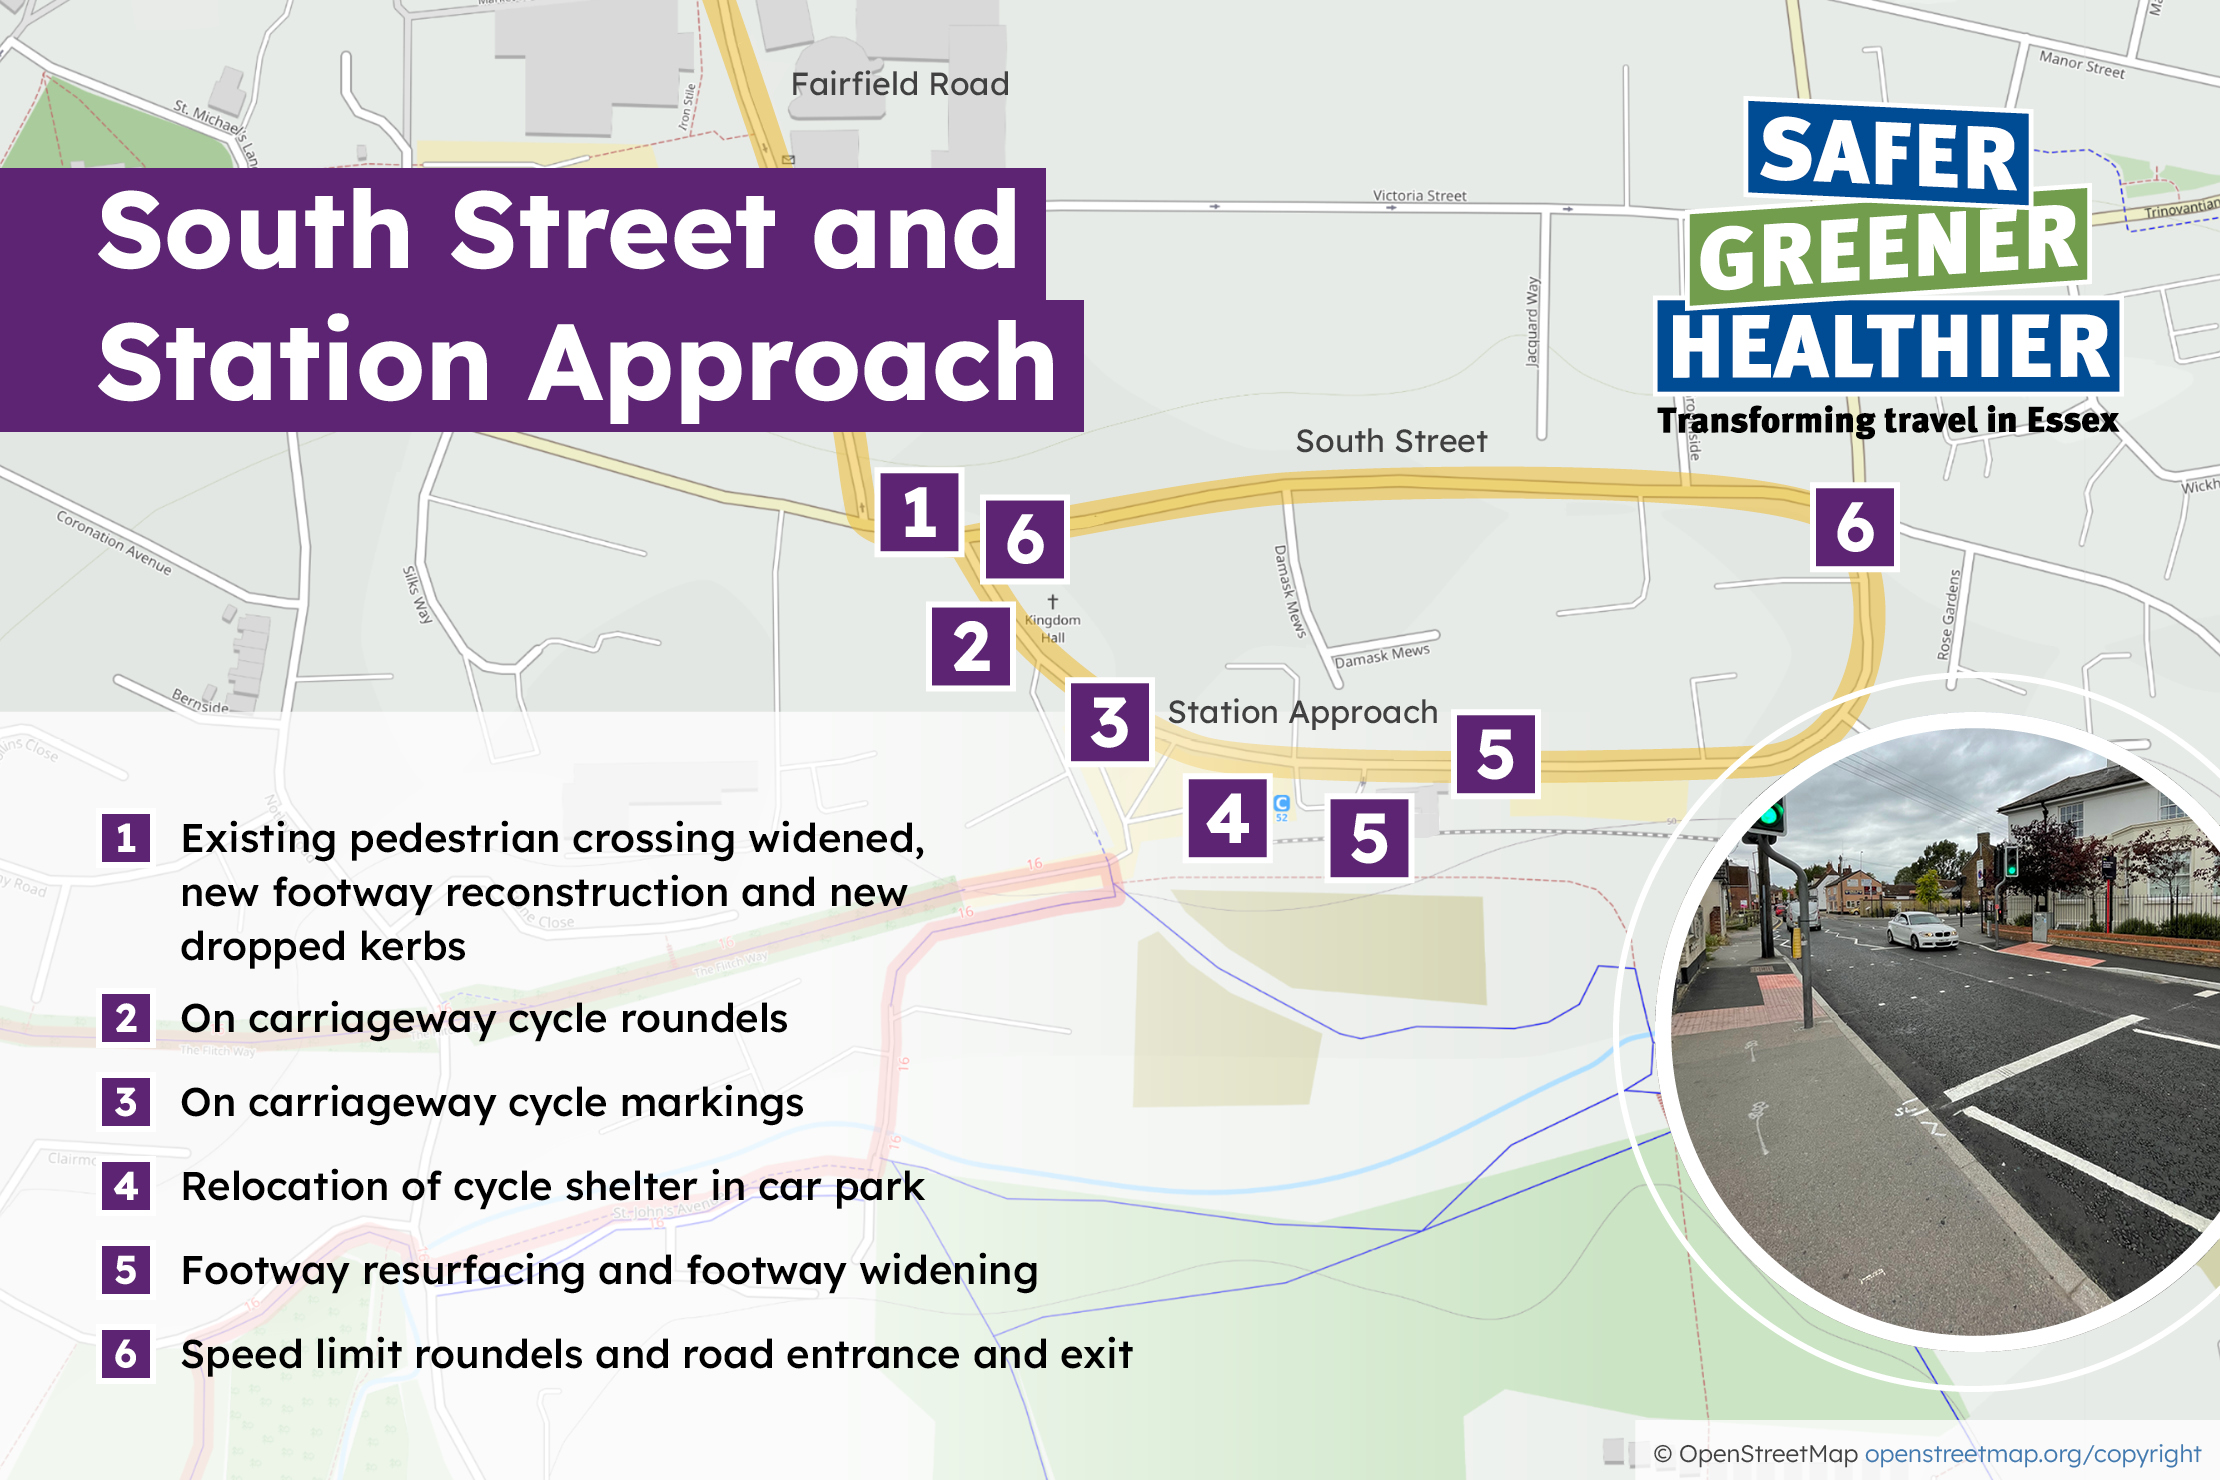 1. Existing pedestrian crossing widened, new footway reconstruction and new dropped kerbs 2. On carriageway cycle roundels 3. On carriageway cycle markings 4. Relocation of cycle shelter in car park 5. Footway resurfacing and footway widening 6. Speed limit roundels and road entrance and exit